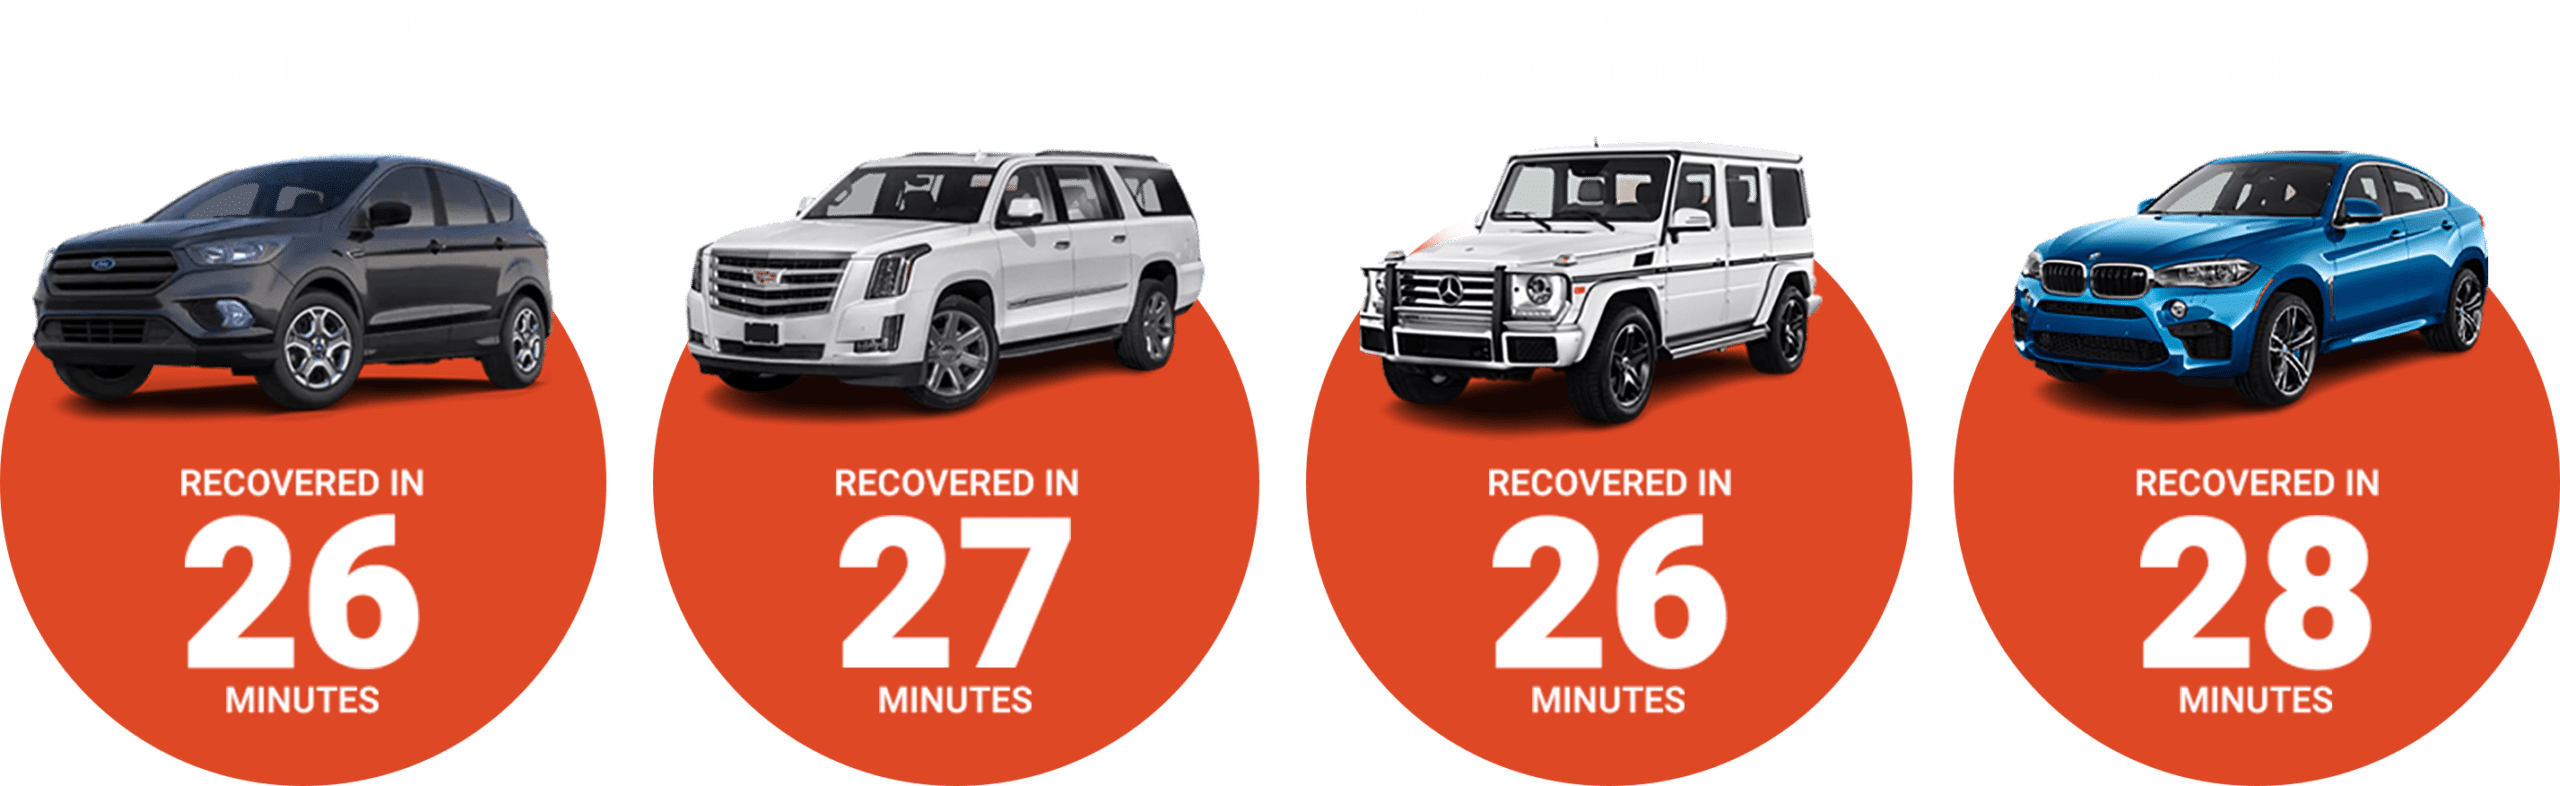 Illustration of successfully recovered vehicles by LoJack in 26, 27, 28 minutes